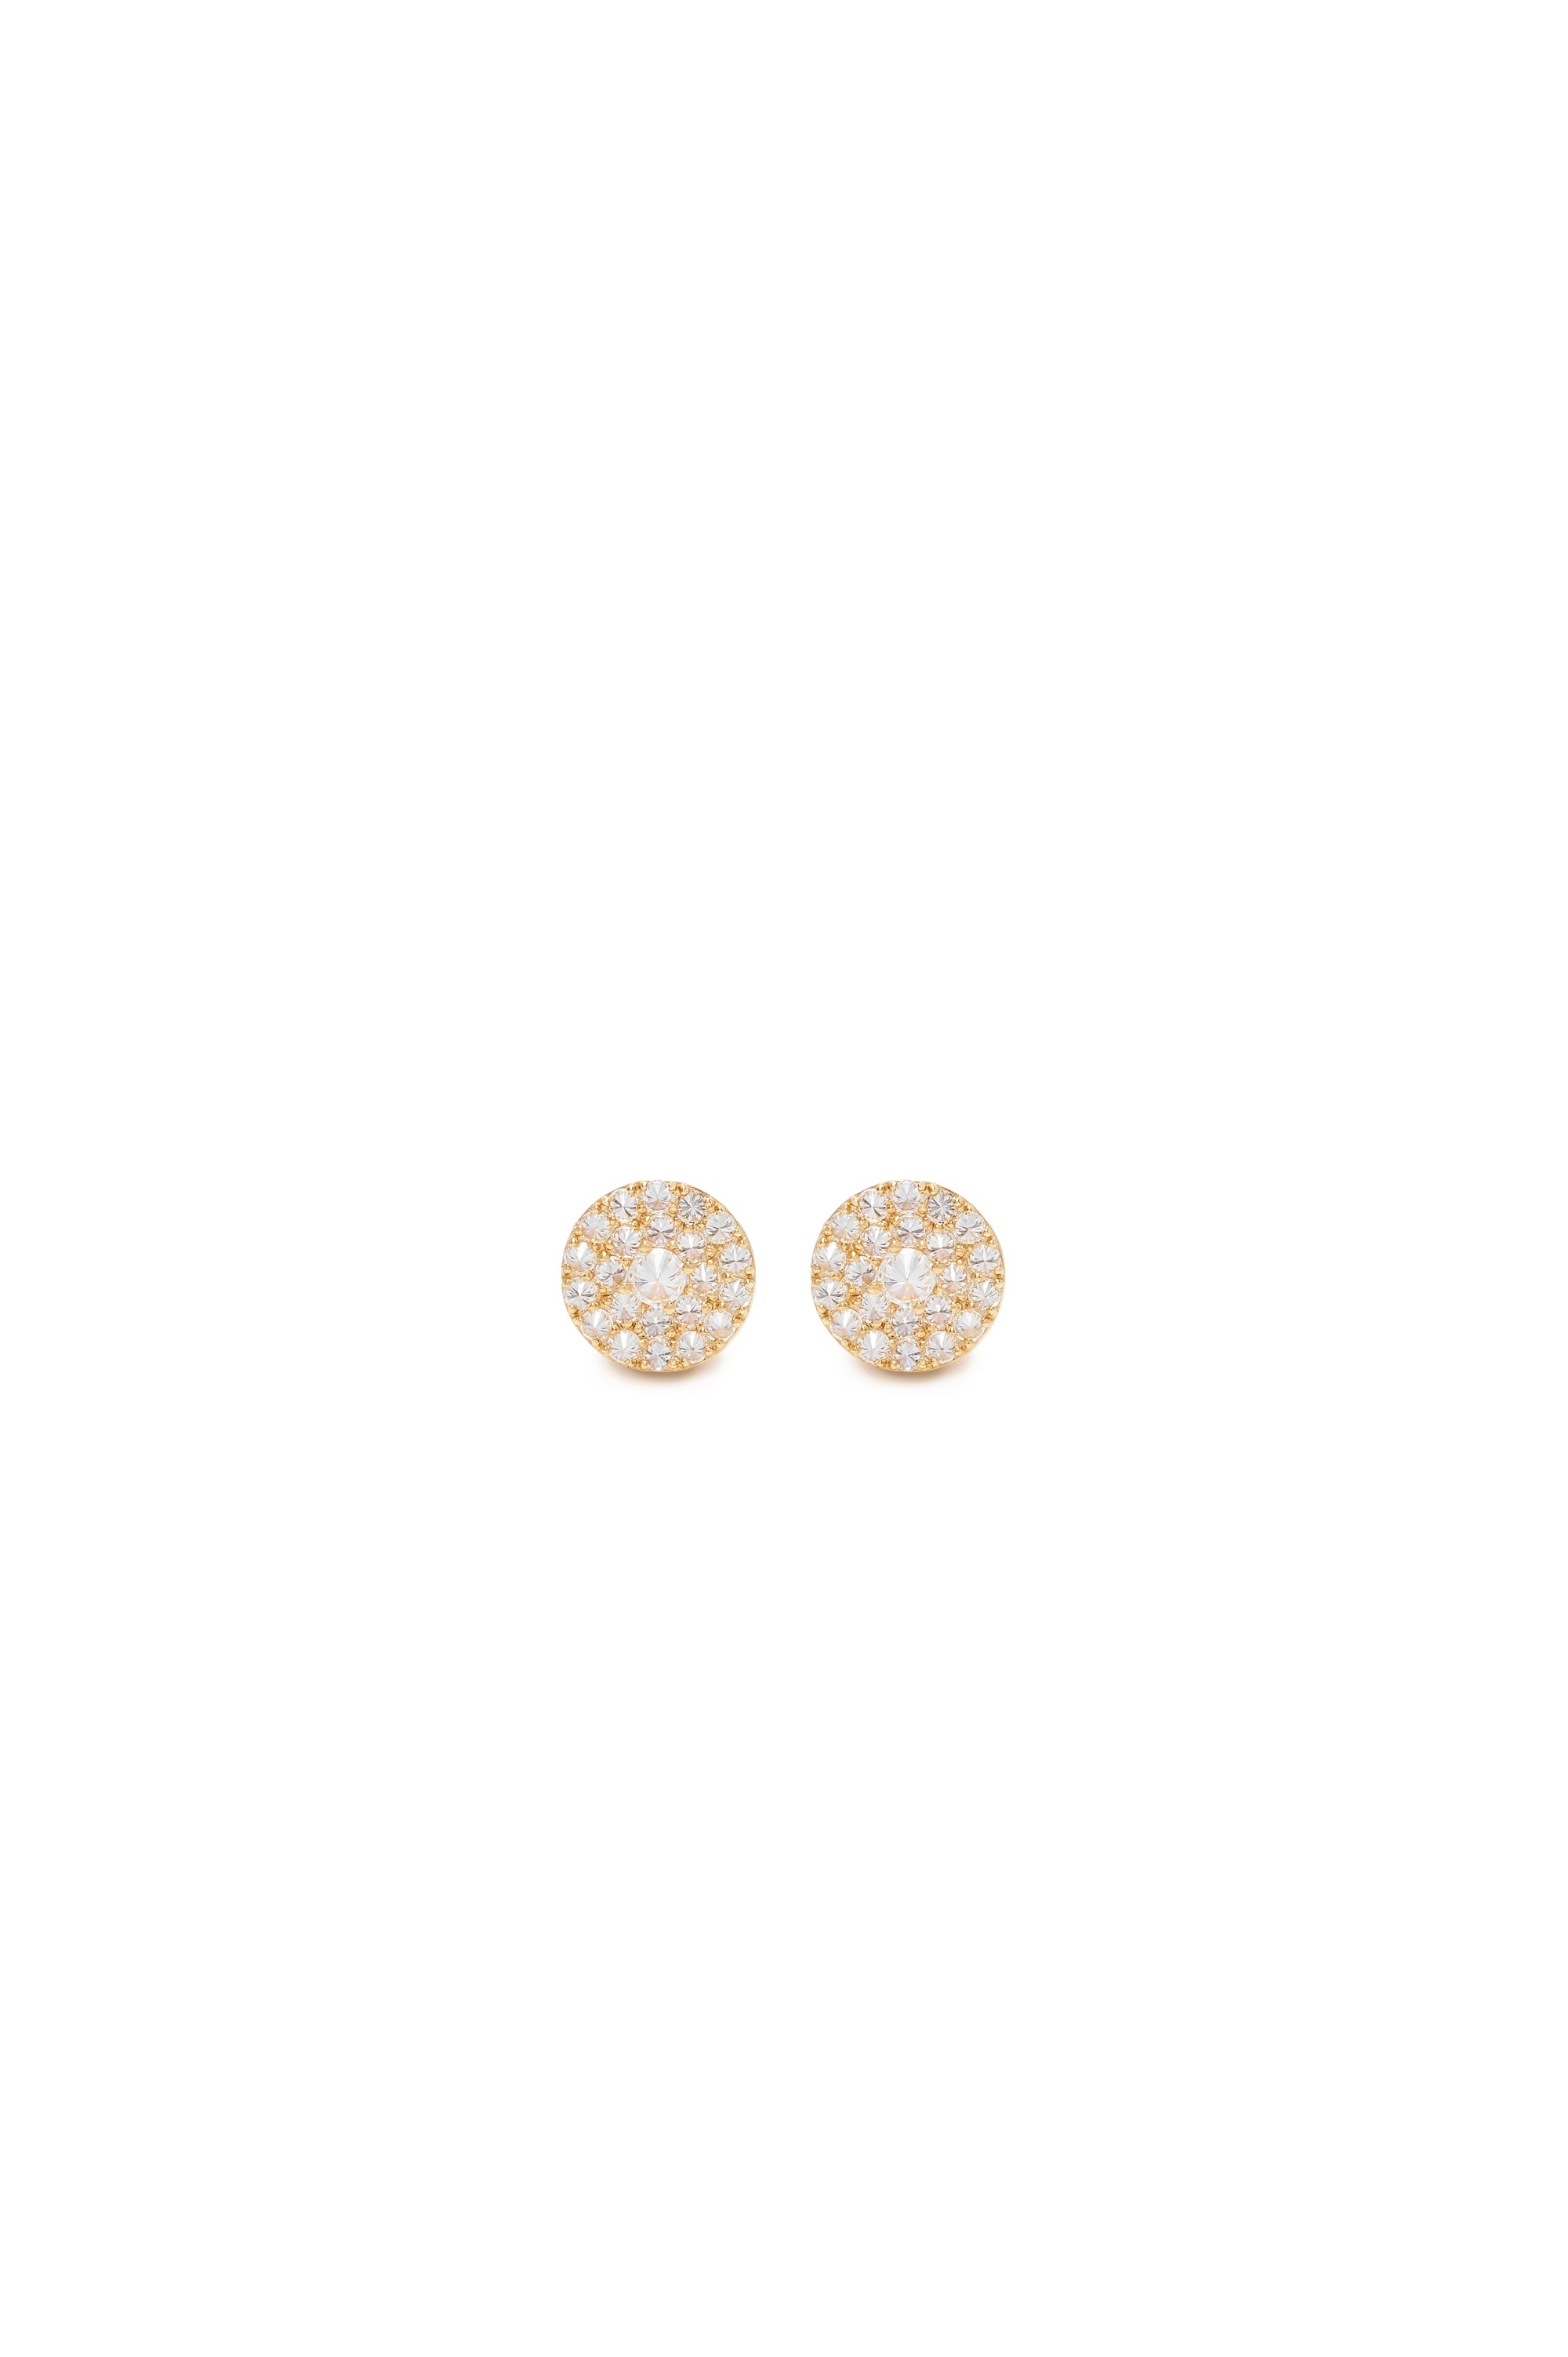 Round stud diamond earrings with Canadian diamonds in 18K yellow gold